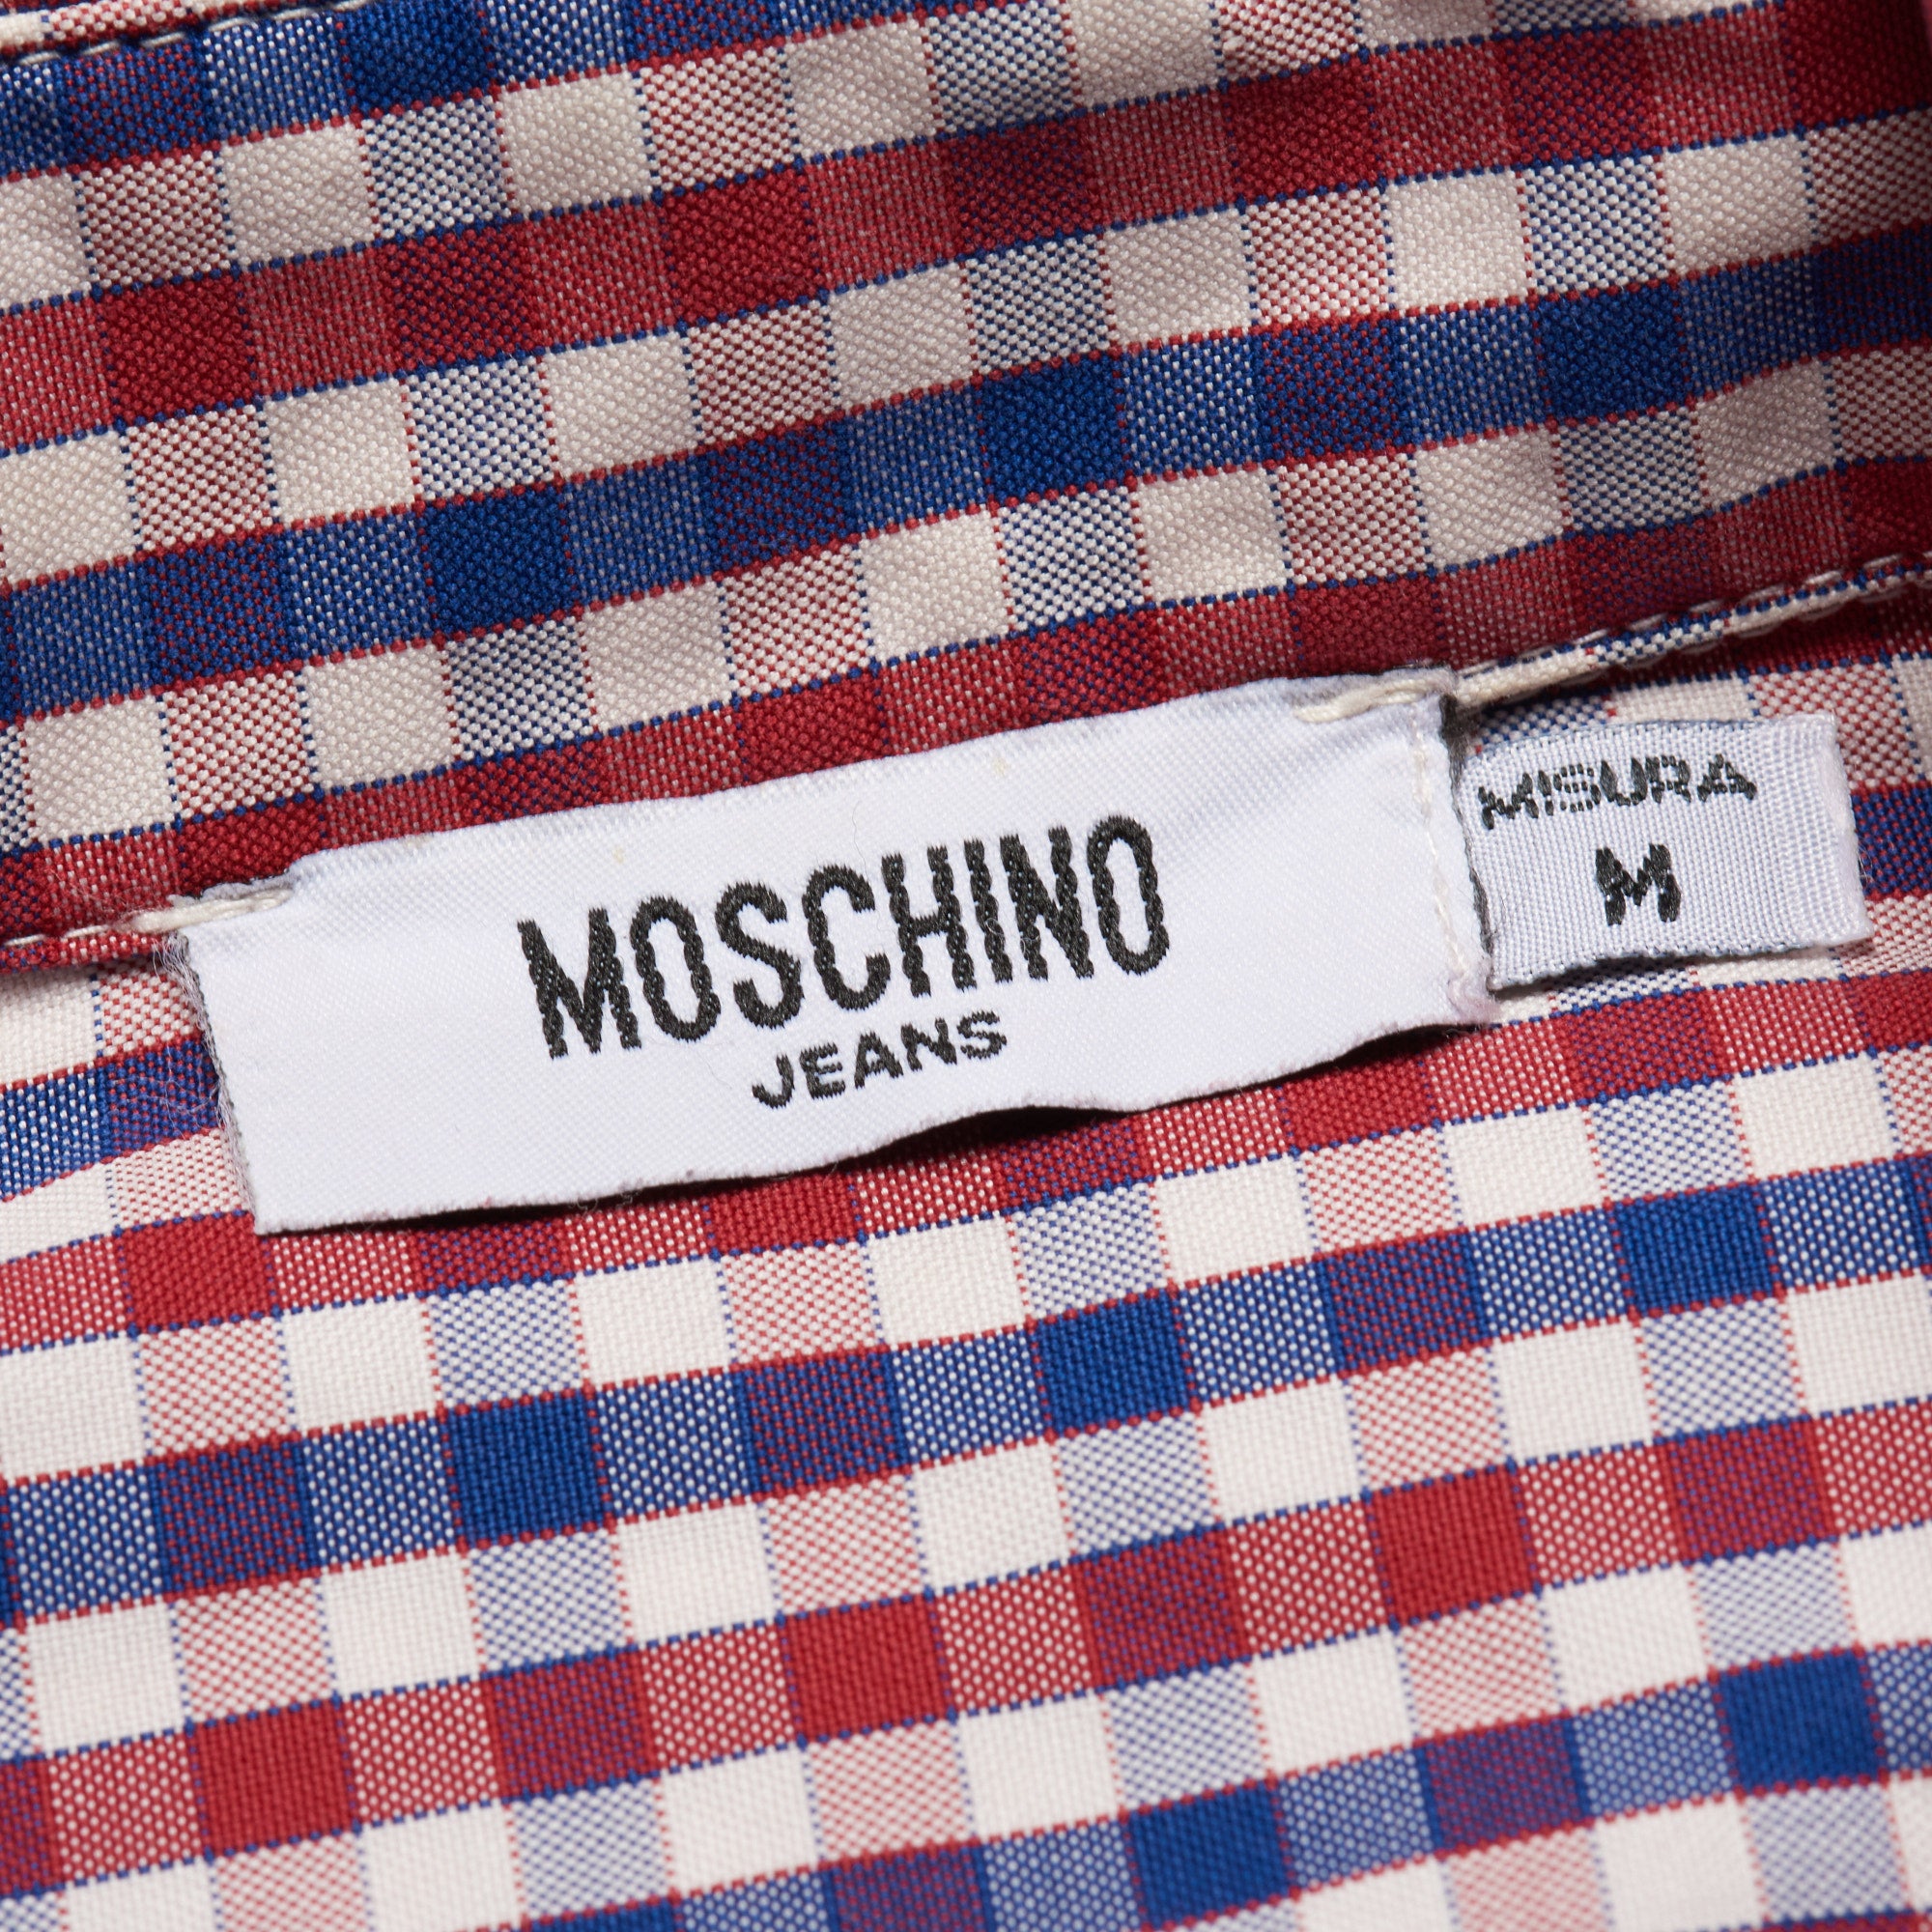 MOSCHINO Jeans Red-Blue Gingham Check Cotton Slim Fit Casual Shirt US M MOSCHINO